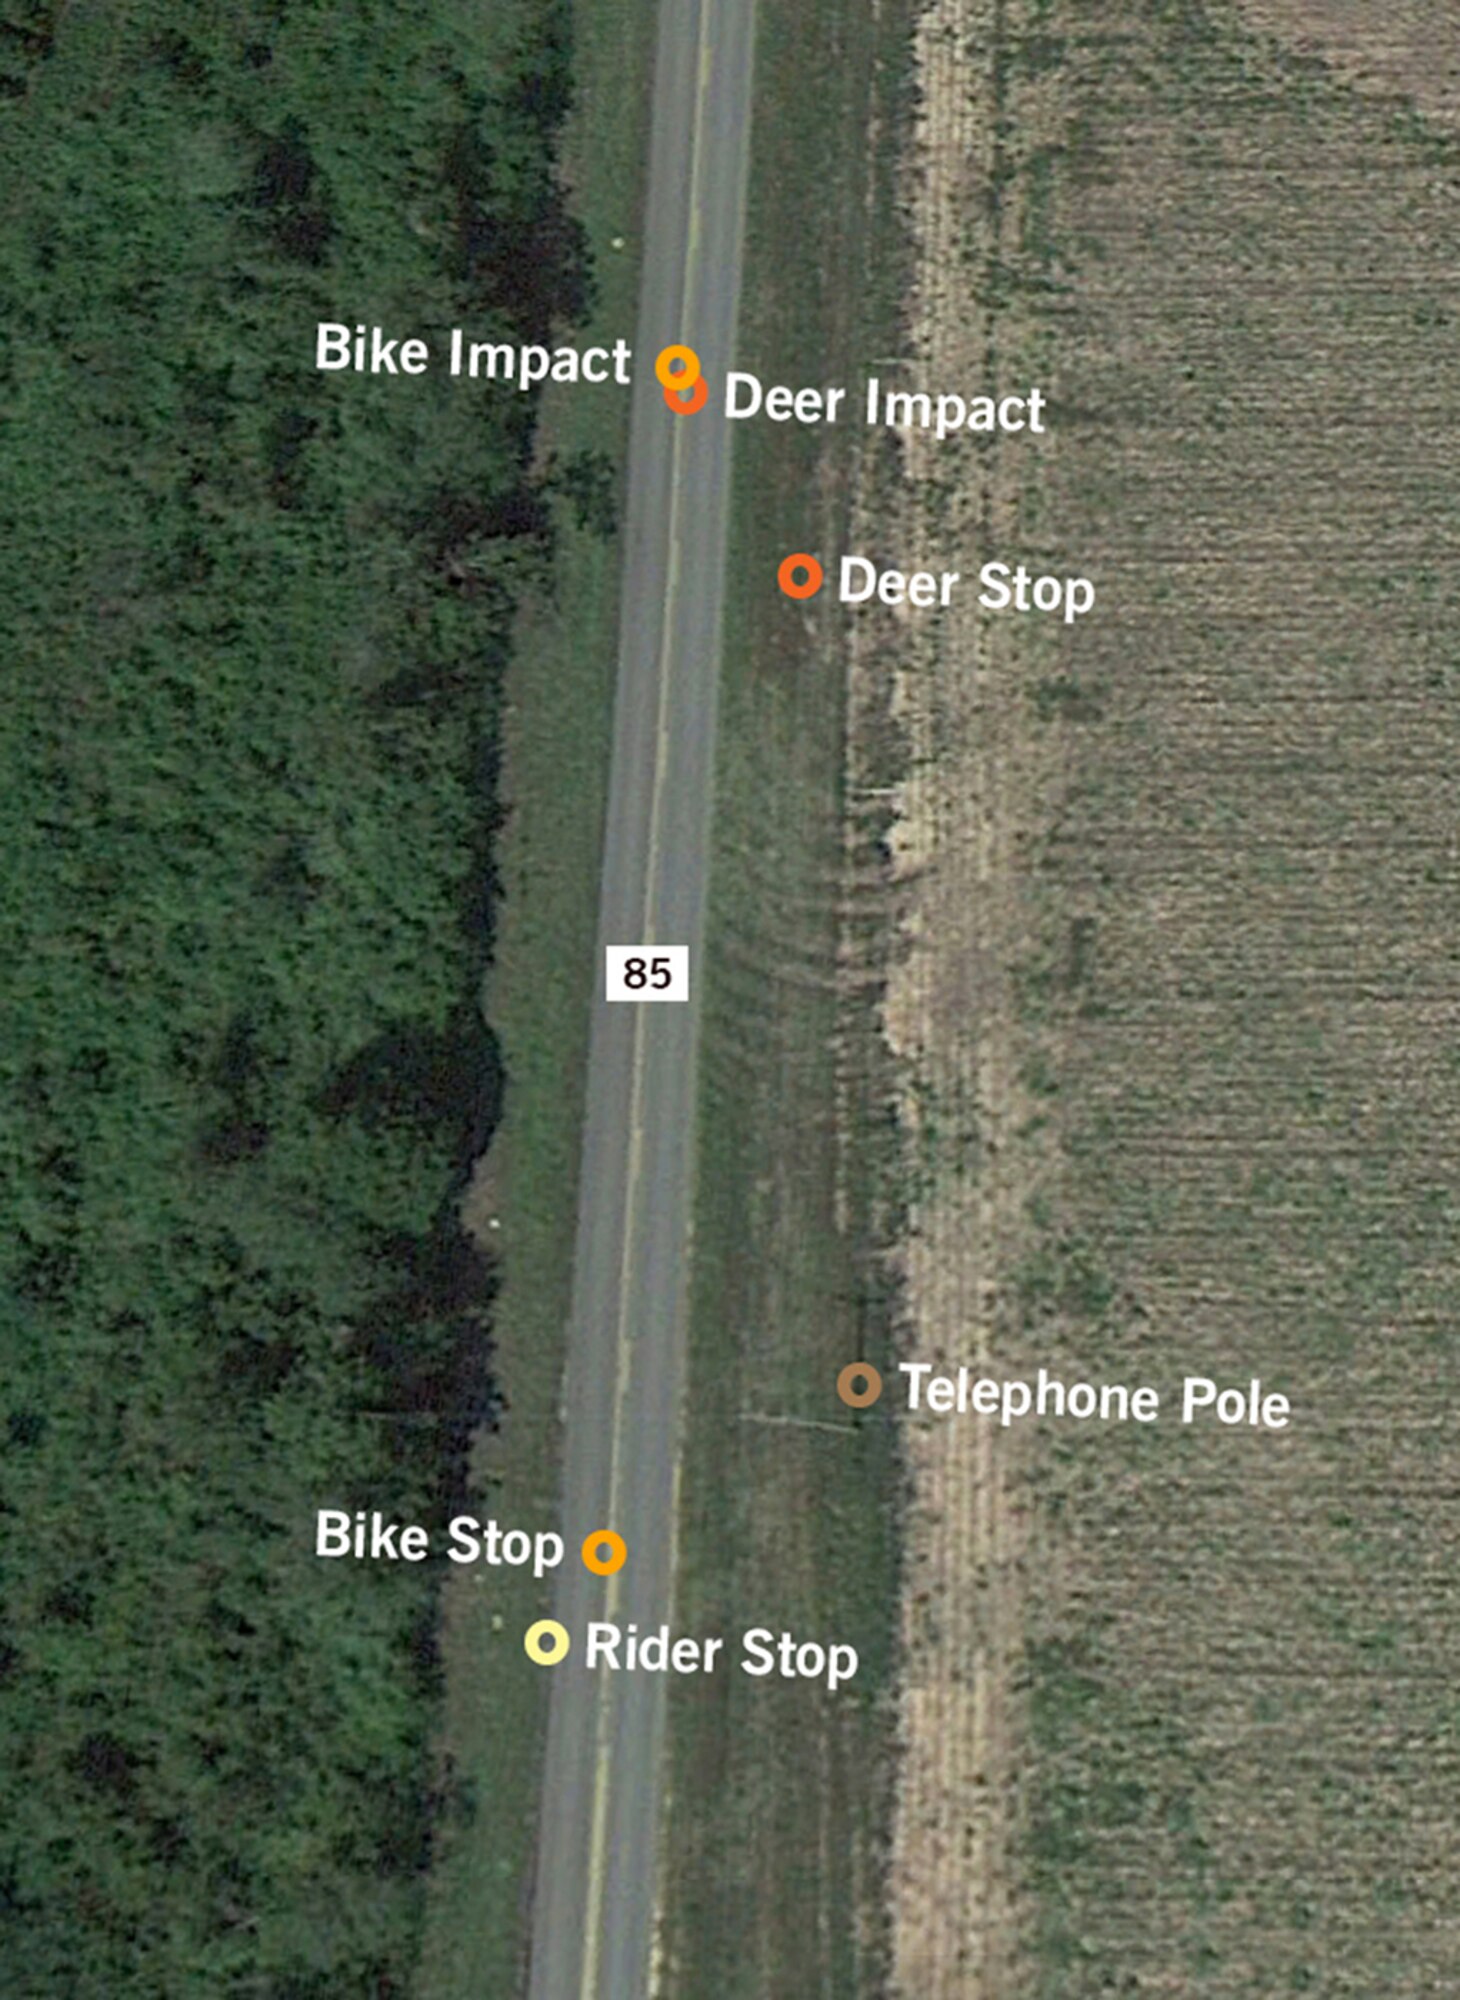 Using Google Earth, this map shows County Road 85, where Ross’s motorcycle struck the deer and where he, the motorcycle and the deer ended up. In the major’s case, that meant he rolled about 278 feet from the point of impact. (Info Graphic by David Stack)